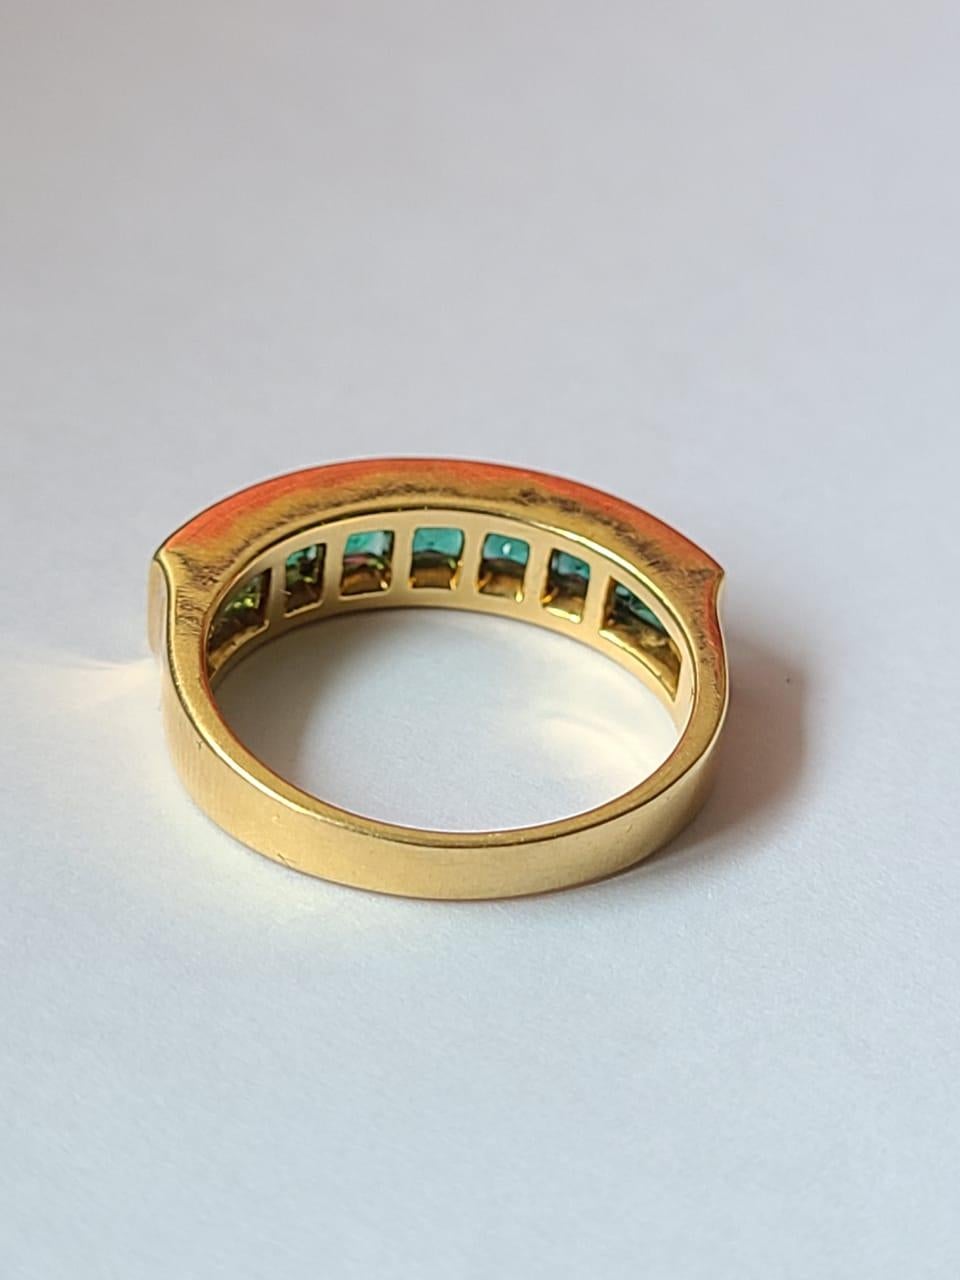 A very gorgeous and chic, Zambian Emerald Band/ Wedding Ring set in 18K Yellow Gold. The weight of the Square cut Emeralds are 1.42 carats. The Emeralds are completely natural, without any treatment & is of Zambian origin. Net Gold weight is 5.67